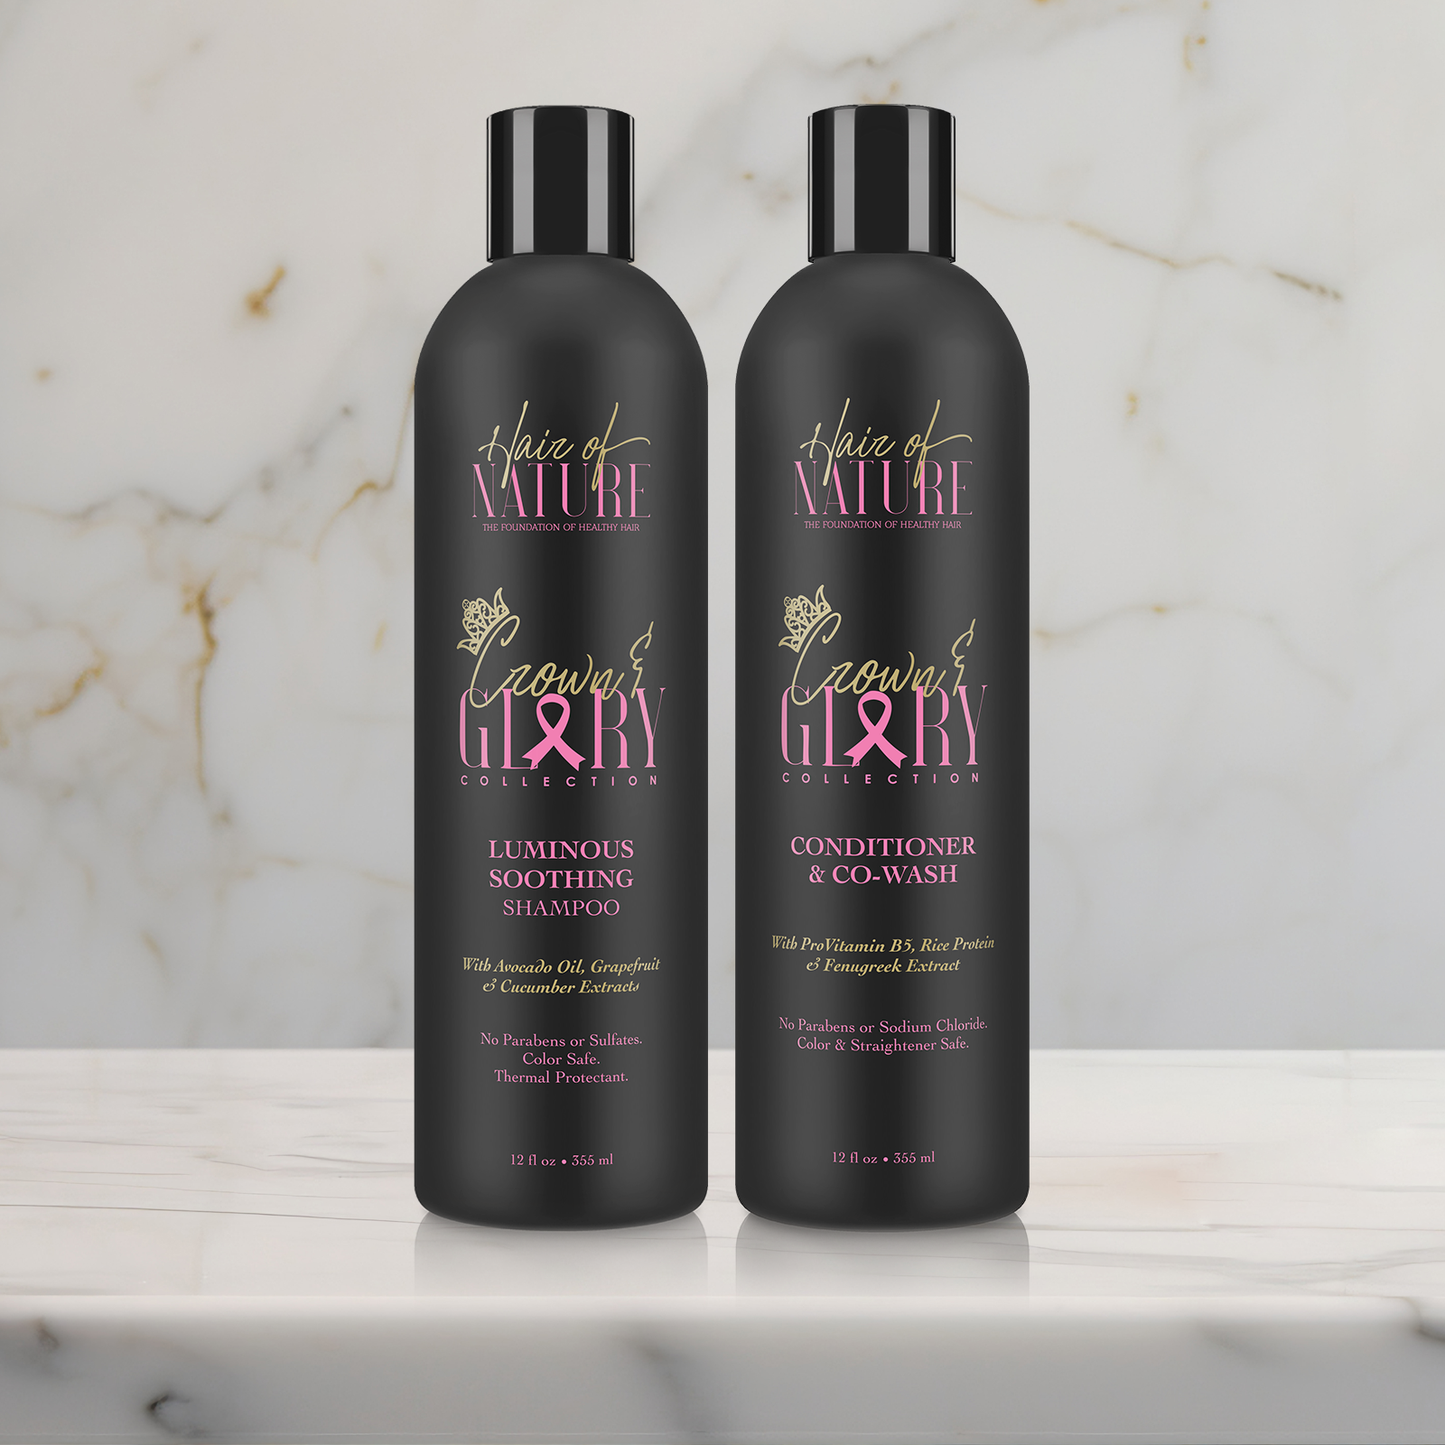 CROWN & GLORY SHAMPOO AND CONDITIONER SET